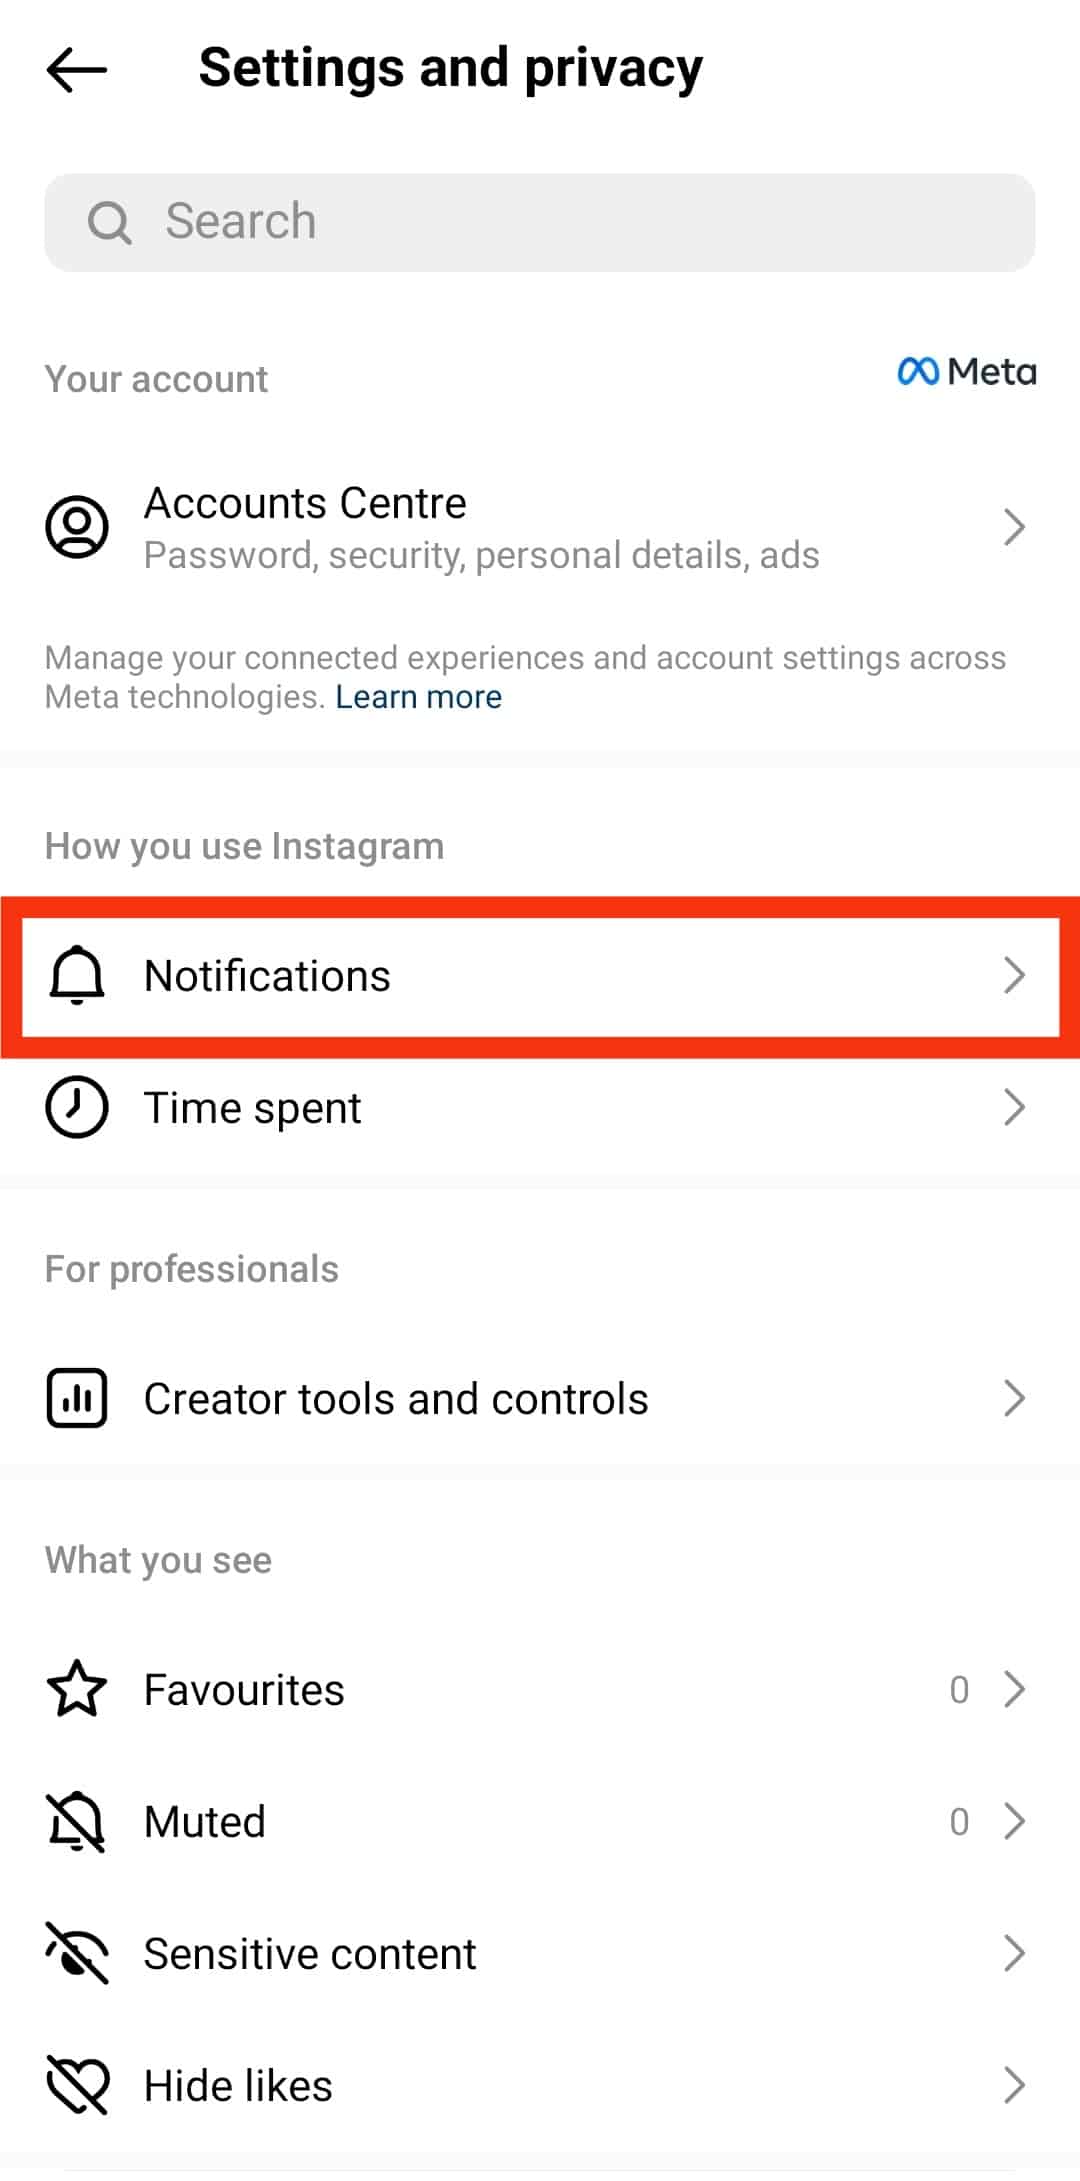 Select Notifications